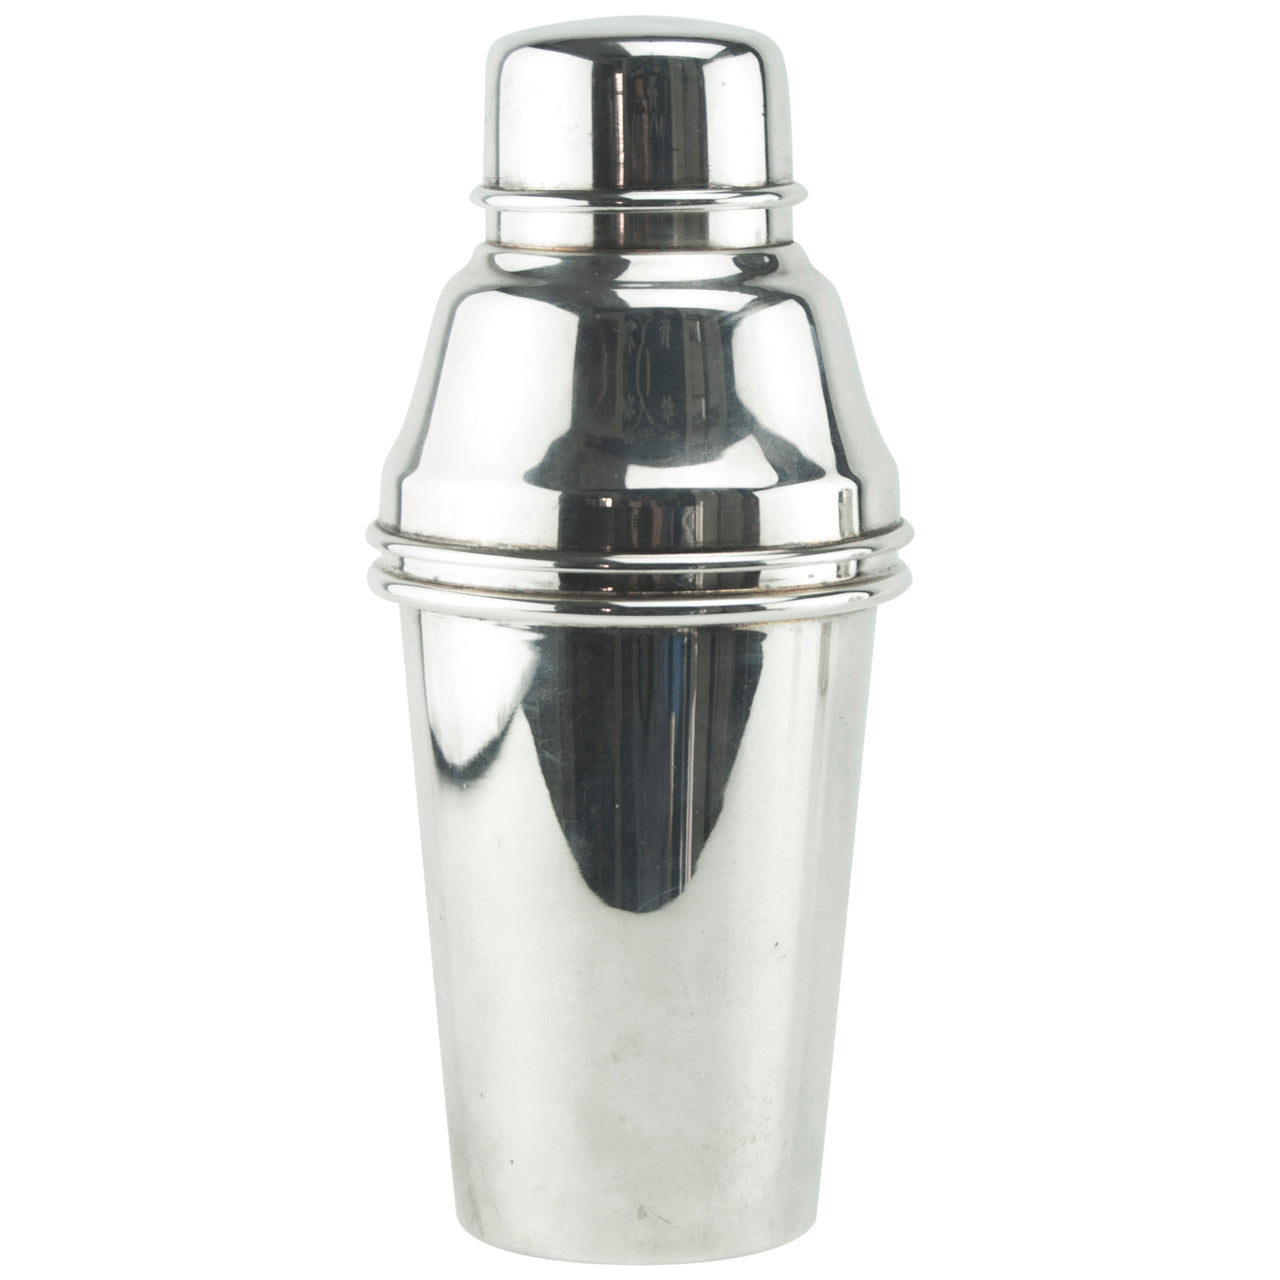 Yeoman Silver Plate Cobbler Cocktail Shaker | The Hour Shop